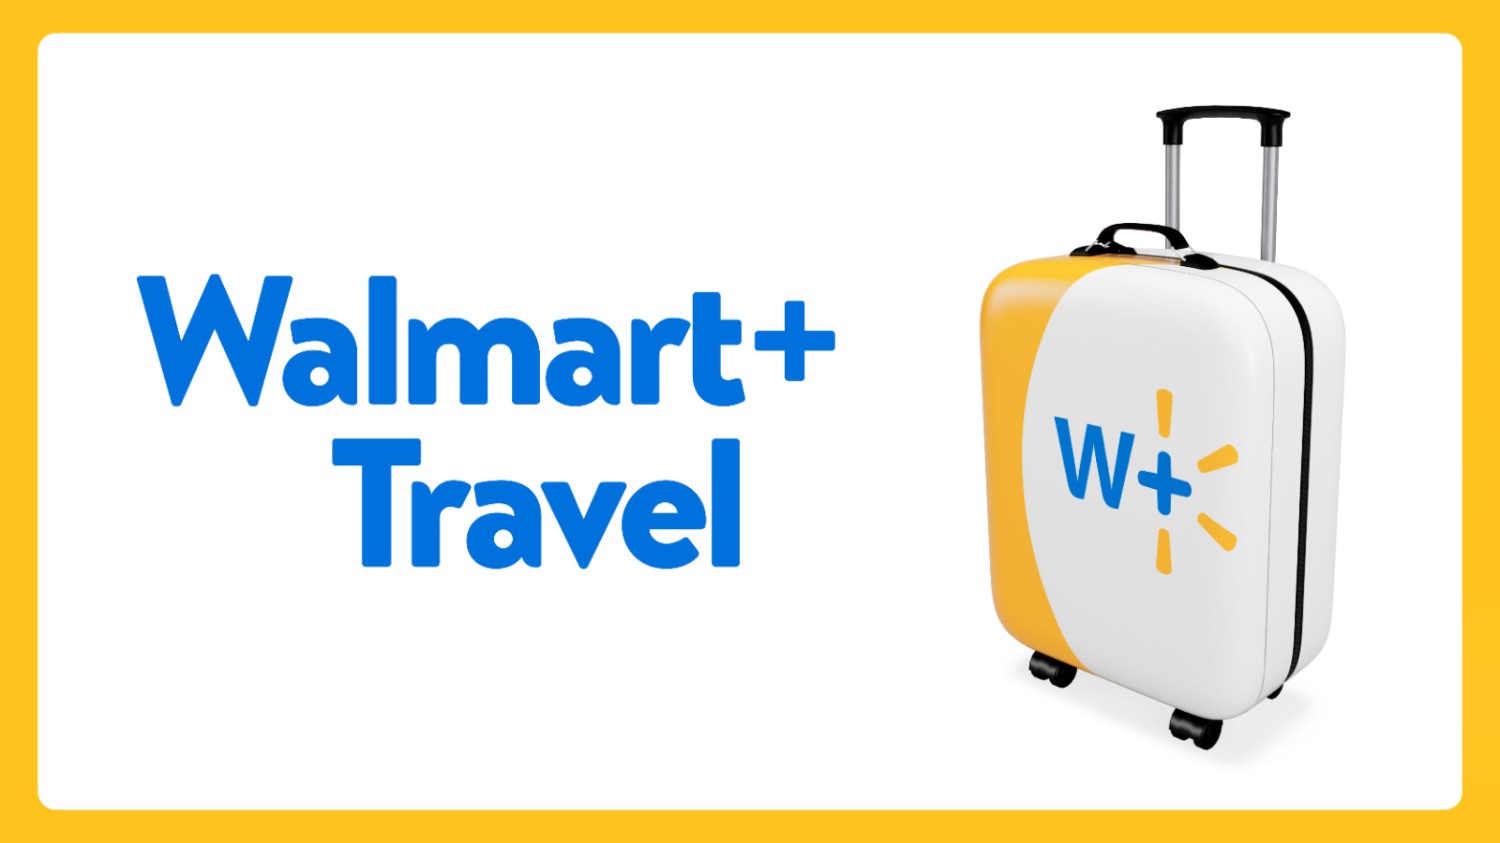 A yellow frame encases the words "Walmart+ Travel" and a suitcase with the W+ logo.